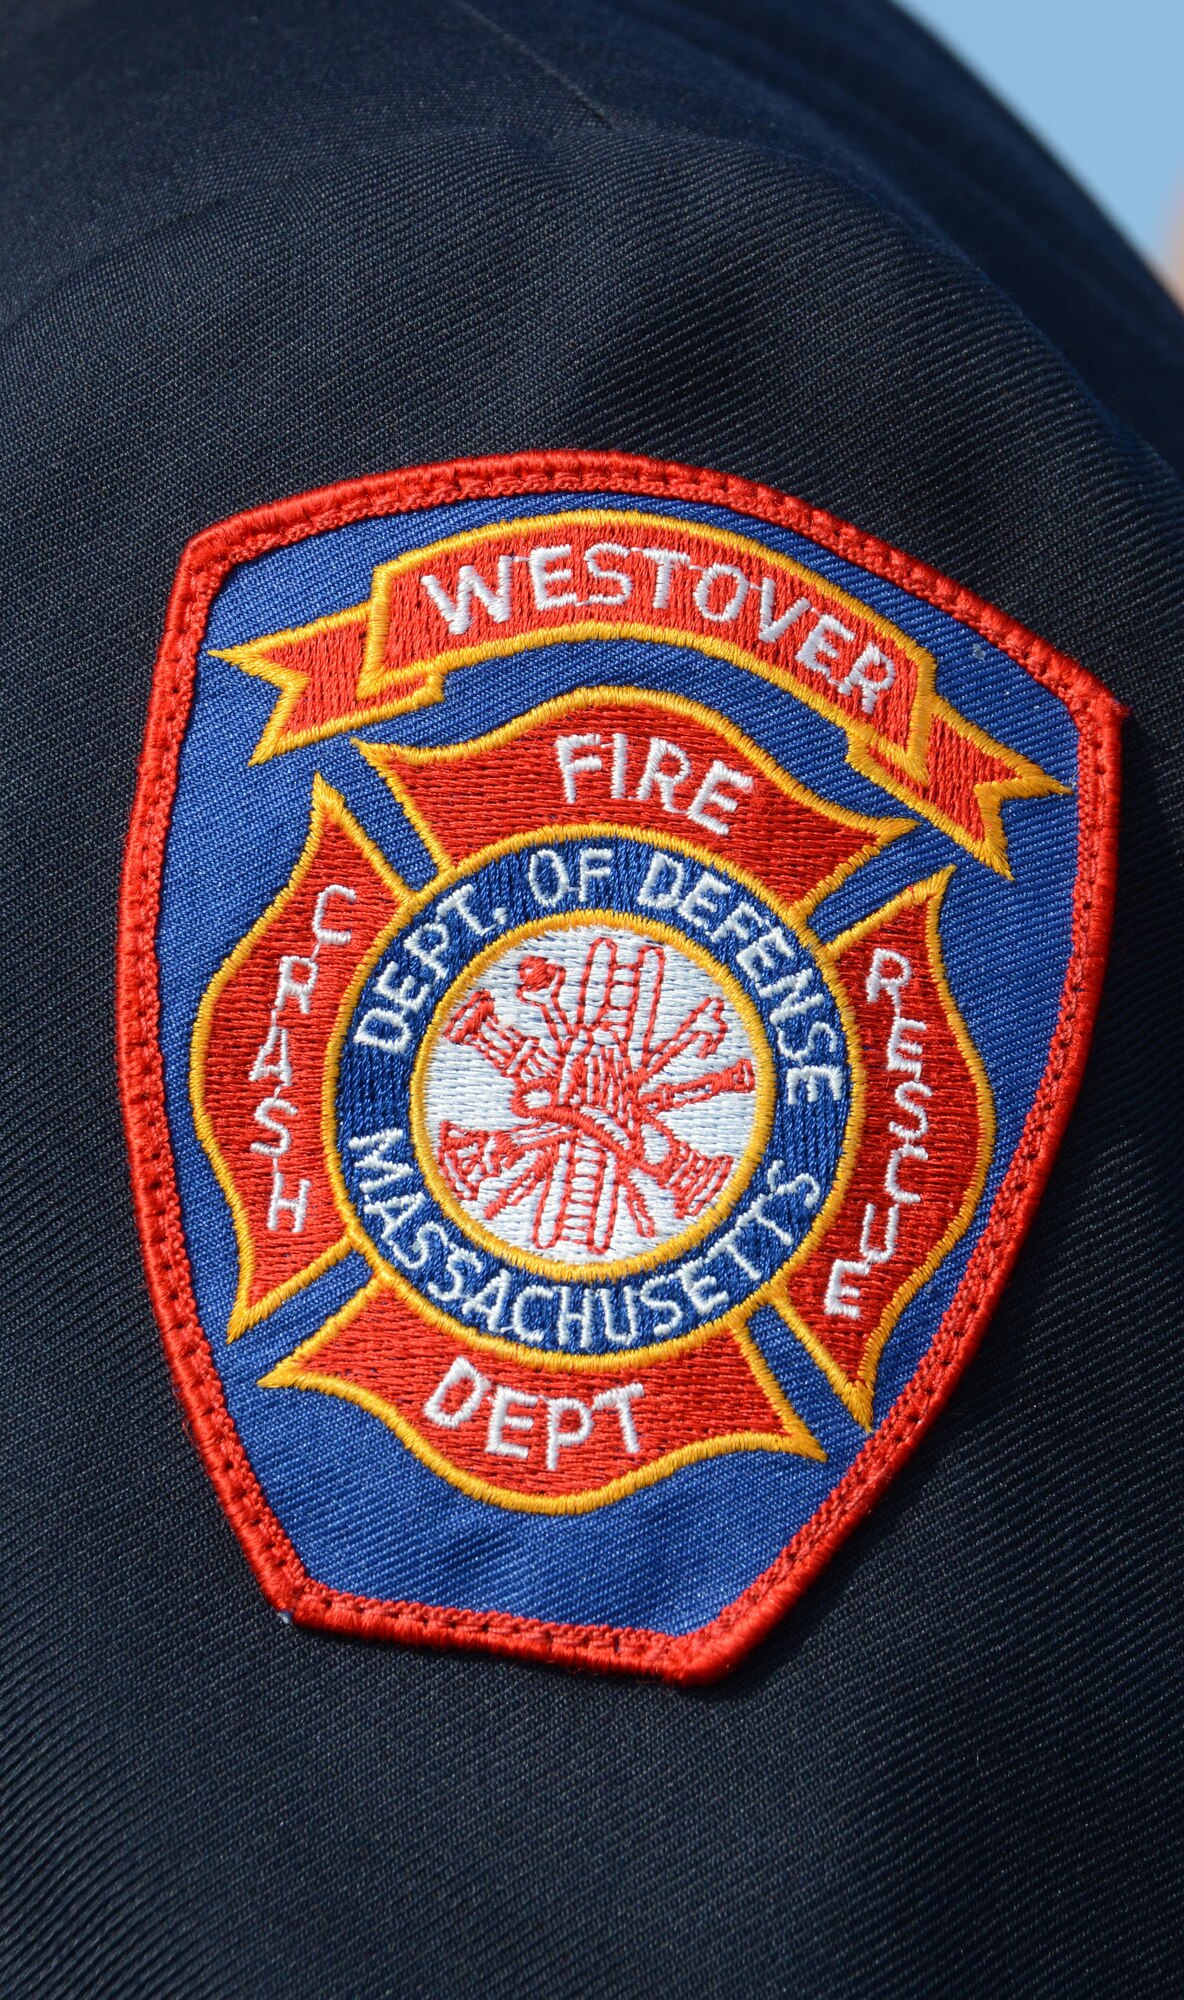 Firemen and Airmen of Westover Air Reserve Base, Mass. remember lives lost on September 11, 2001, in a ceremony September 11, 2017, on the ellipse. Firemen and Airmen of Westover Air Reserve Base, Mass. remember lives lost on September 11, 2001, in a ceremony September 11, 2017, on the ellipse. 16 years ago today, four passenger airliners were hijacked by Al-Qaeda terrorists. Two of these aircraft, American Airlines Flight 11, and United Airlines Flight 175, were crashed into the North and South towers, respectively, of the World Trade Center complex in New York City. A third aircraft, American Airlines Flight 77, was crashed into the Pentagon in Arlington County, Virginia. And a fourth plane, United Airlines Flight 93, which was initially steered toward Washington D.C., but crashed into a field in Stonycreek Township, Pennsylvania after passengers tried to overcome the hijackers. (U.S. Air Force photo by Airman Hanna N. Smith)